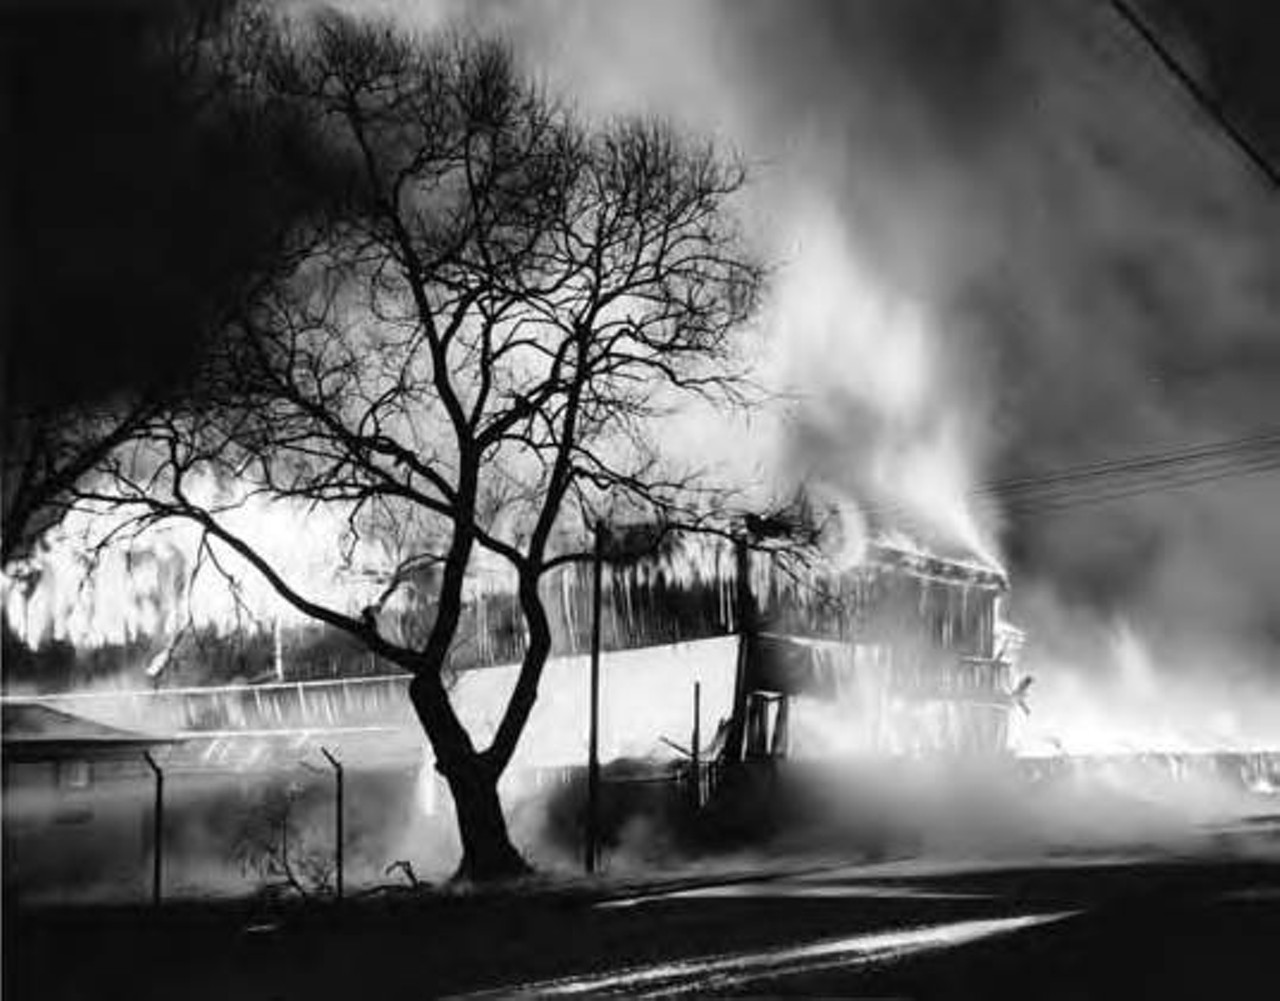  Fire at Geauga Lake, 1952 